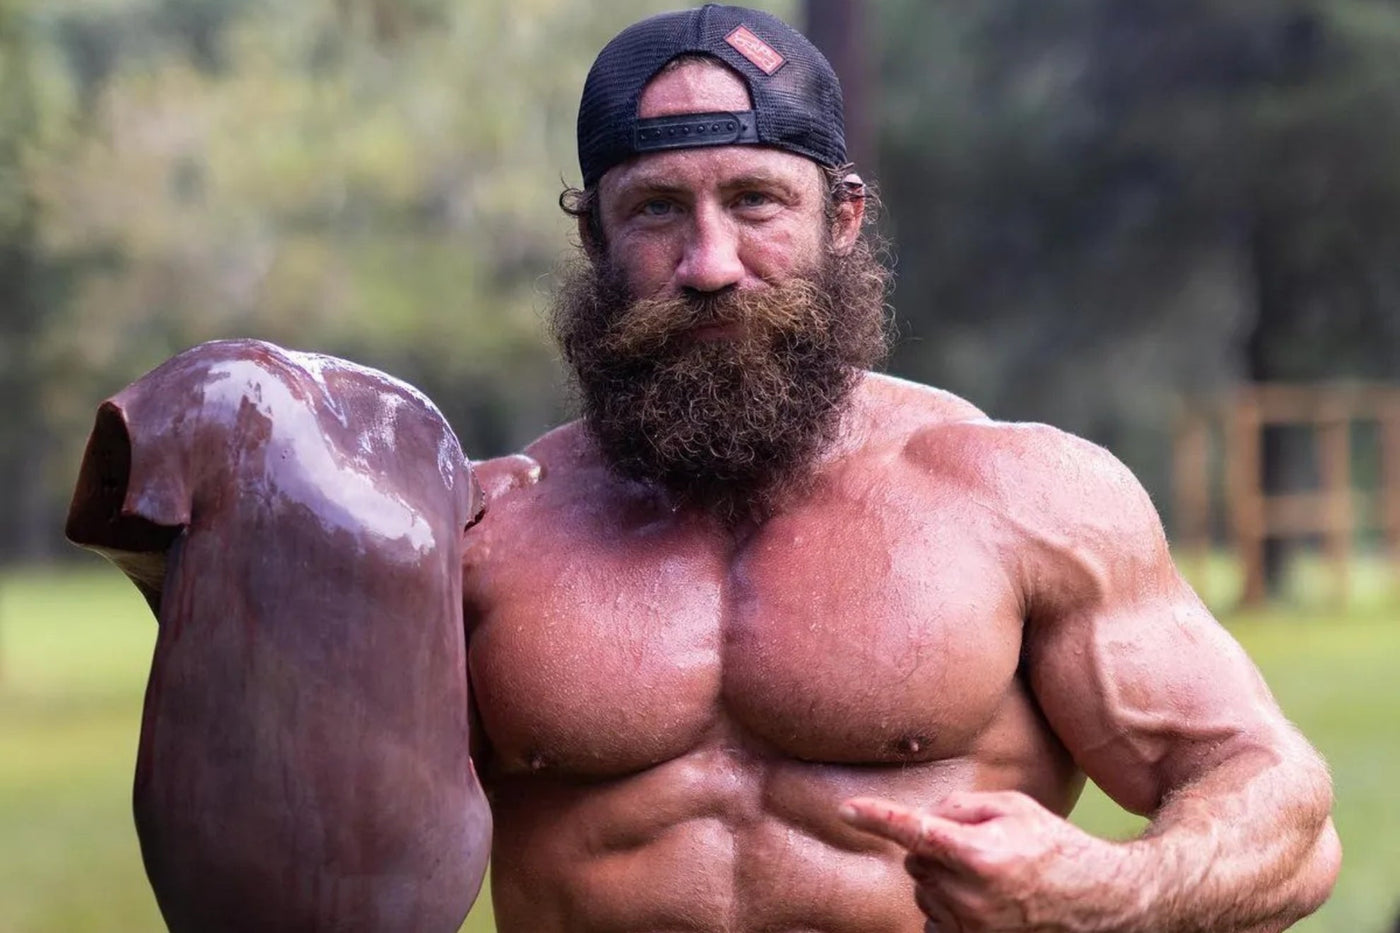 The Shocking Truth About "Liver King": Steroids, Deception, and the Dangers of His Extreme Fitness Regime - Organic Muscle Fitness Supplements